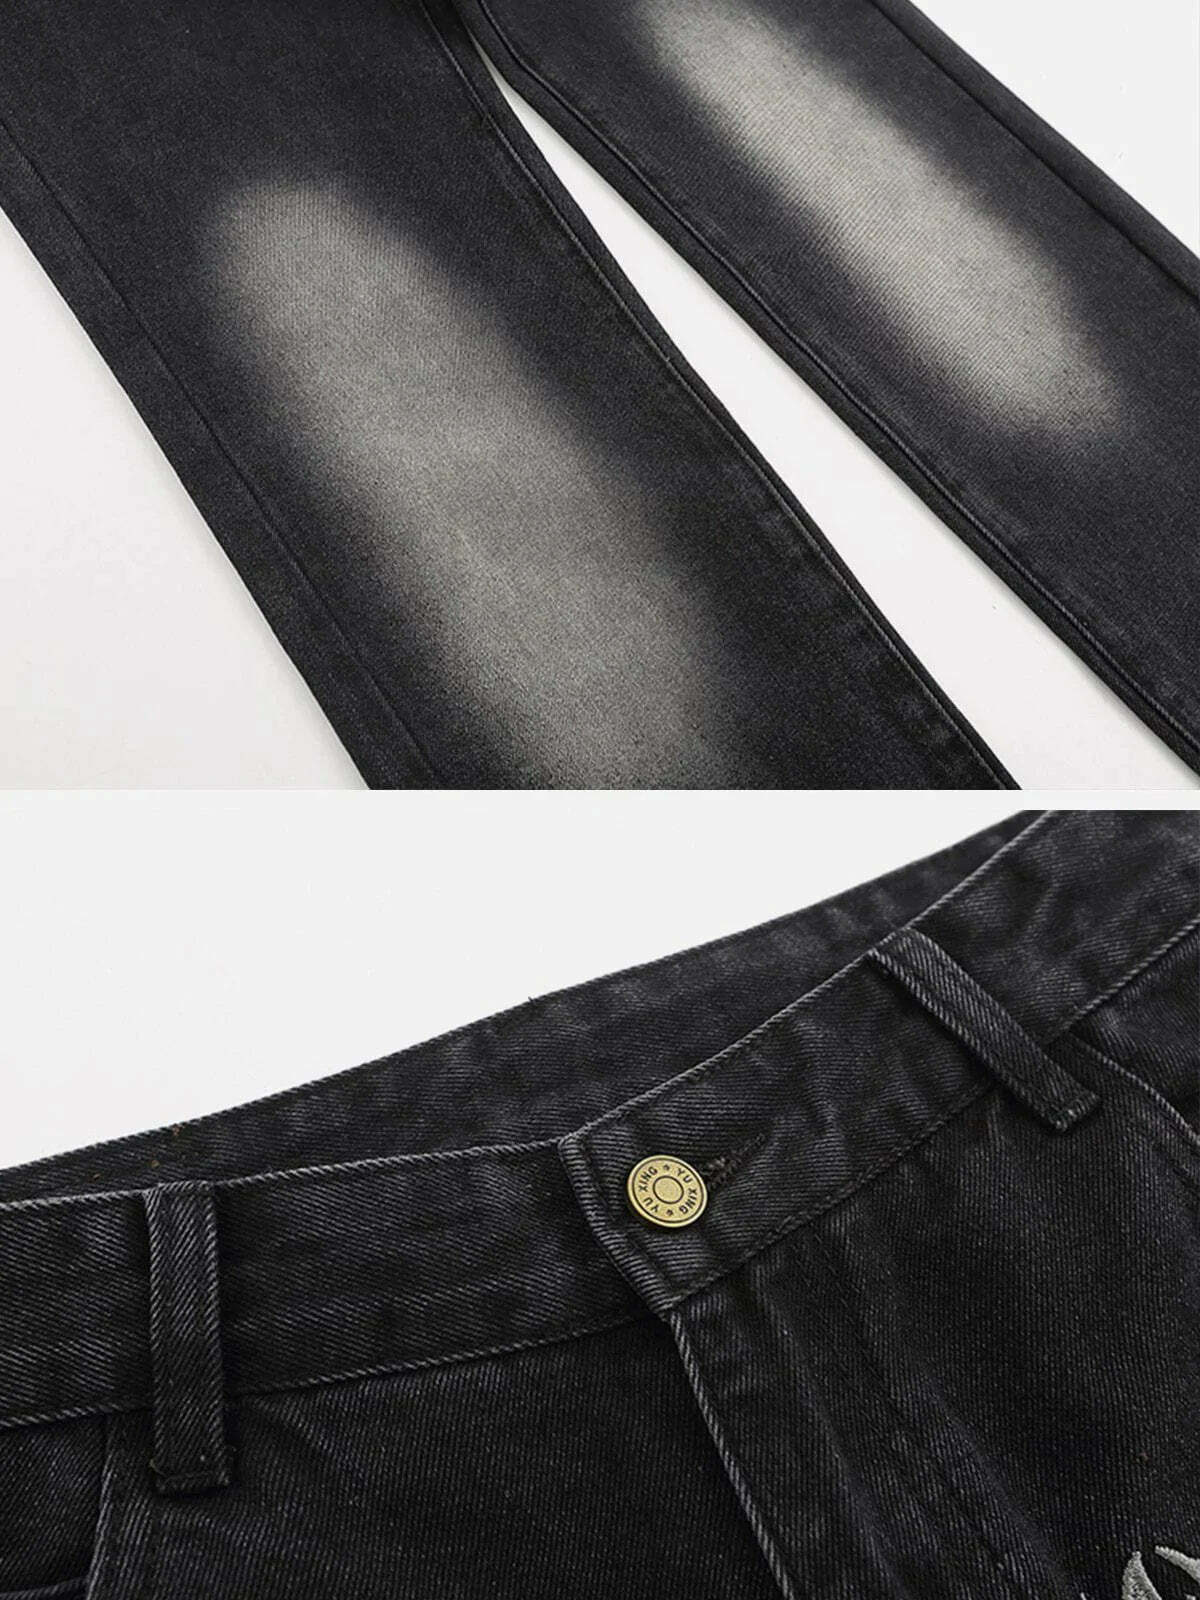 vintage bat embroidered jeans distressed & edgy 7265